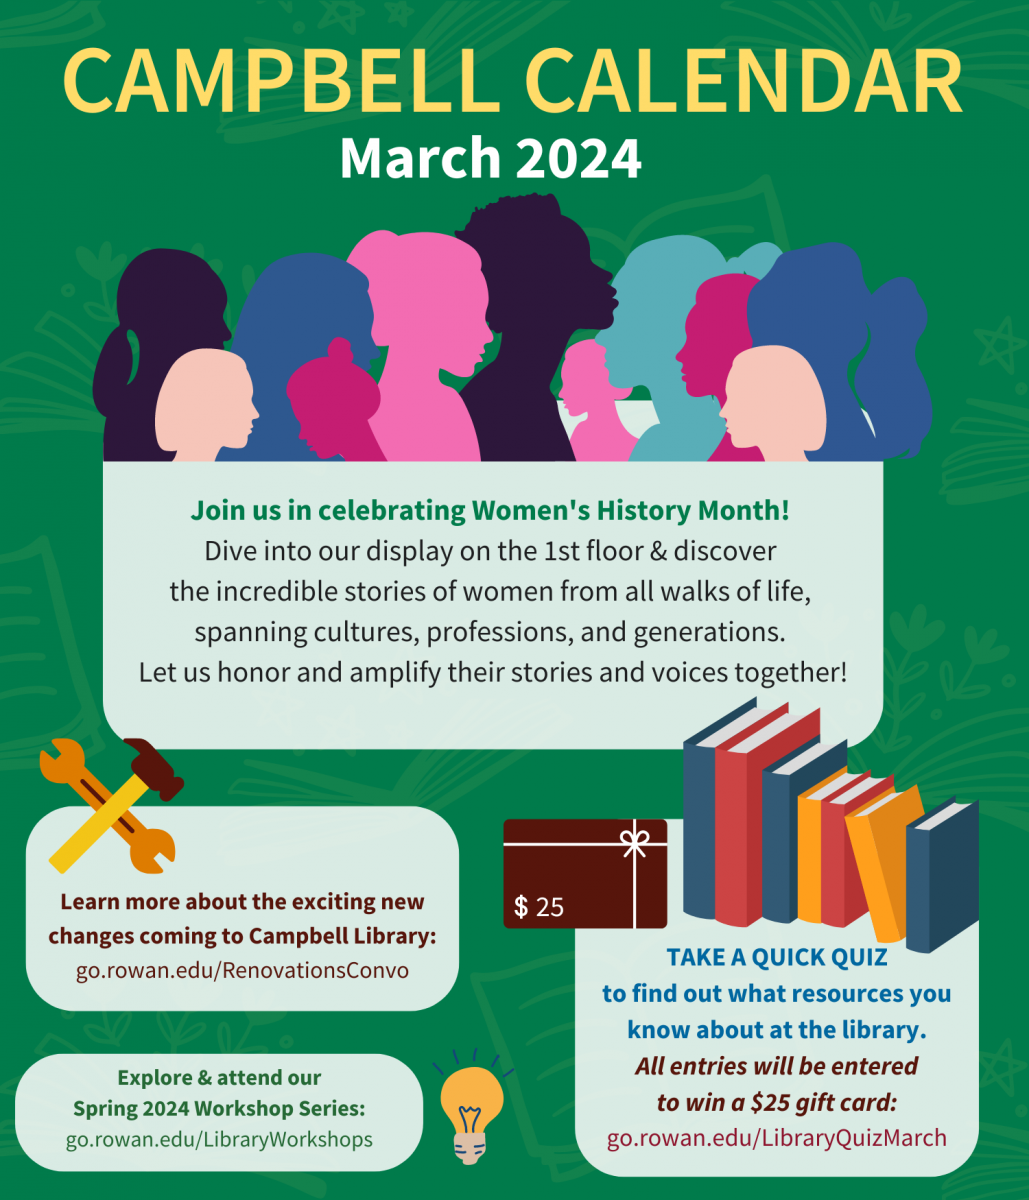 Campbell Calendar: March 2024  Join us in celebrating Women's History Month! Dive into our display on the 1st floor & discover the incredible stories of women from all walks of life, spanning cultures, professions, and generations. Let us honor and amplify their stories and voices together! Learn more about the exciting new changes coming to Campbell Library: go.rowan.edu/RenovationsConvo Explore & attend our Spring 2024 Workshop Series: go.rowan.edu/LibraryWorkshops Take a quick quiz to find out what resources you know about at the library. All entries will be entered to win a $25 gift card: go.rowan.edu/LibraryQuizMarch